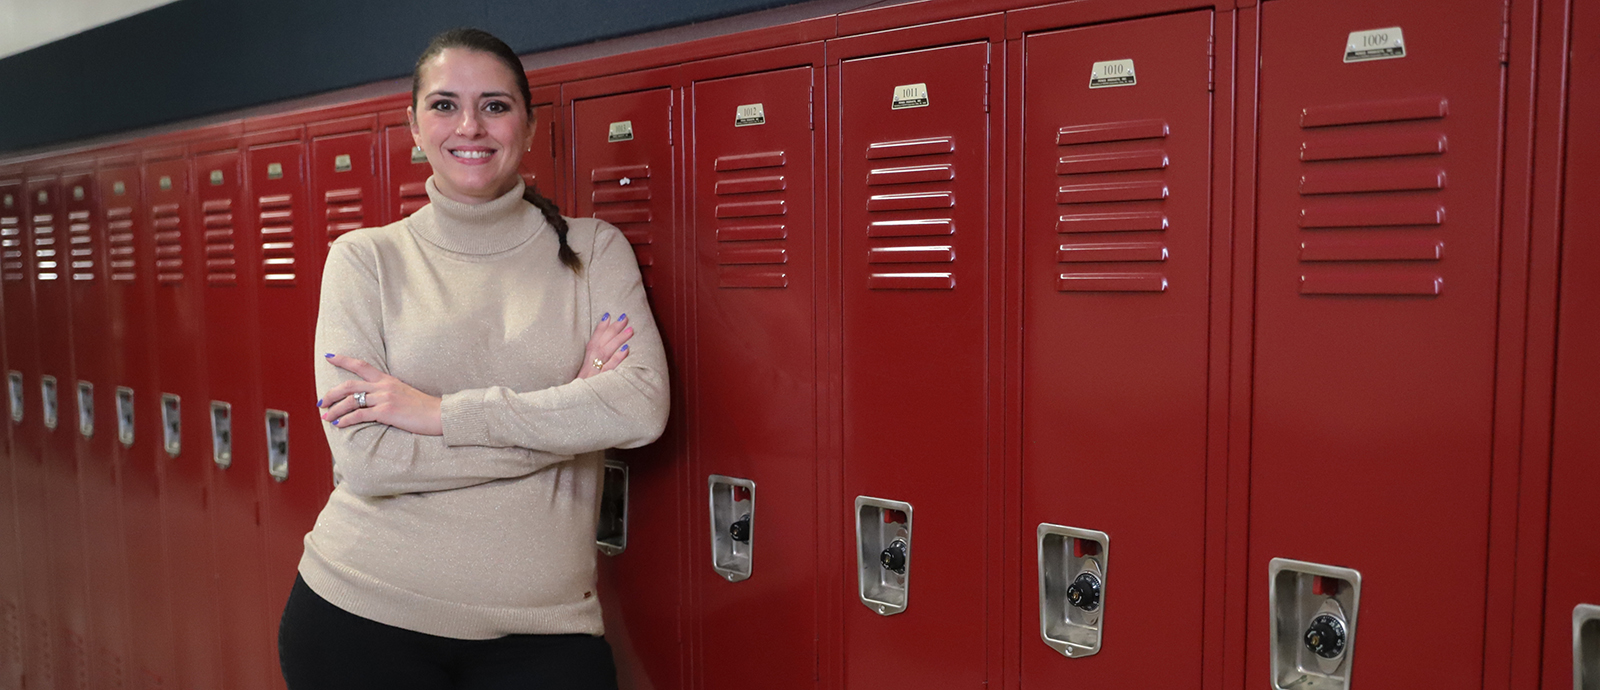 Toni leans on a set of lockers in the hallway